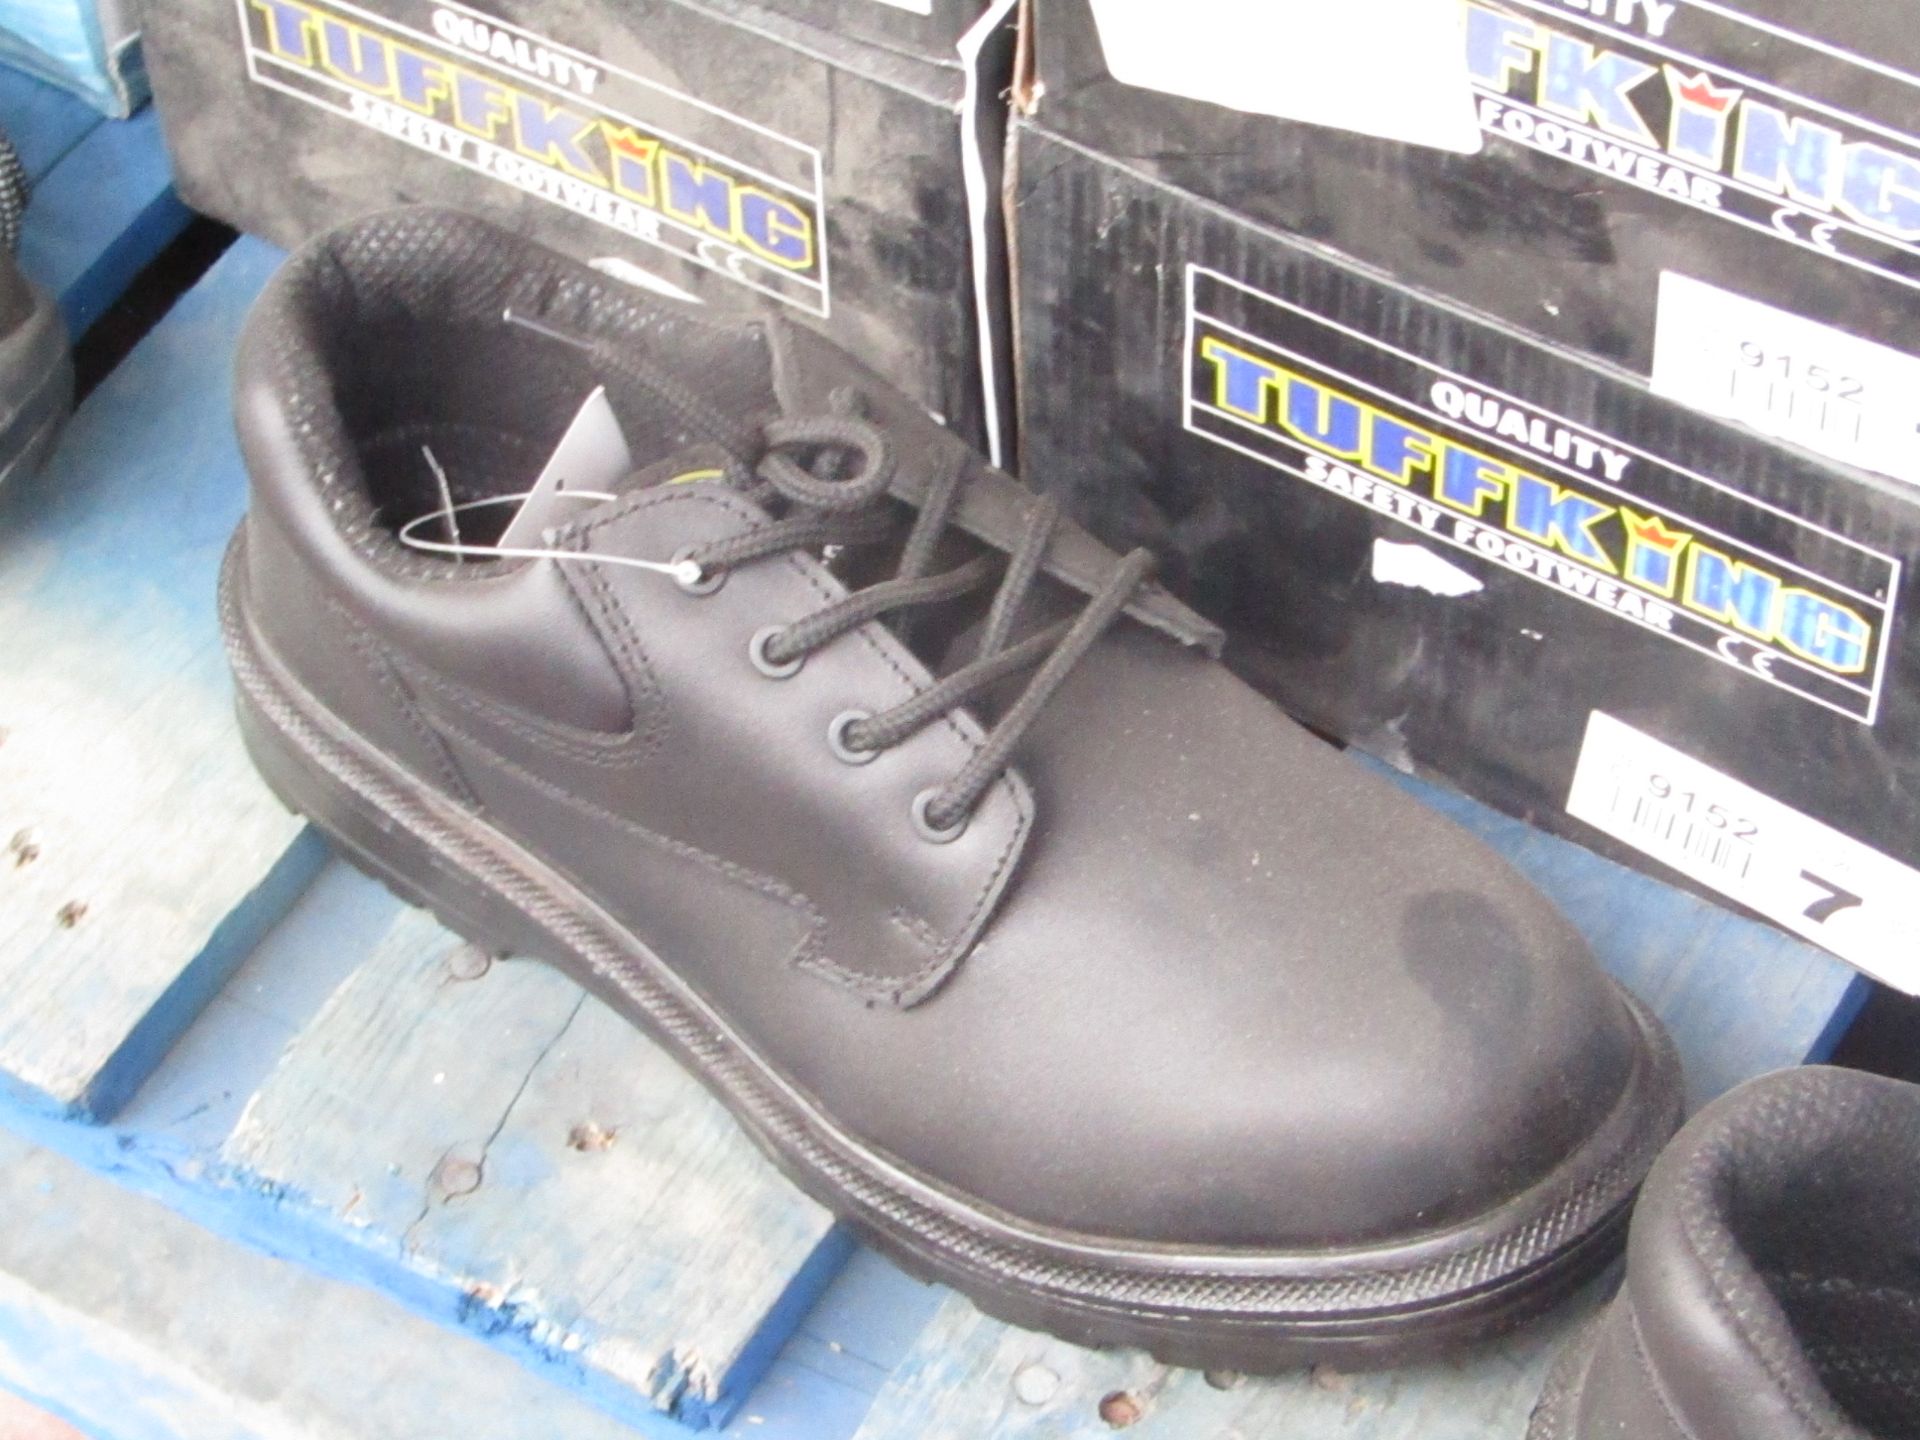 Tuffking Steel Toe Cap Genuine Leather Safety Shoes, new, Size 8 RRP £44.95